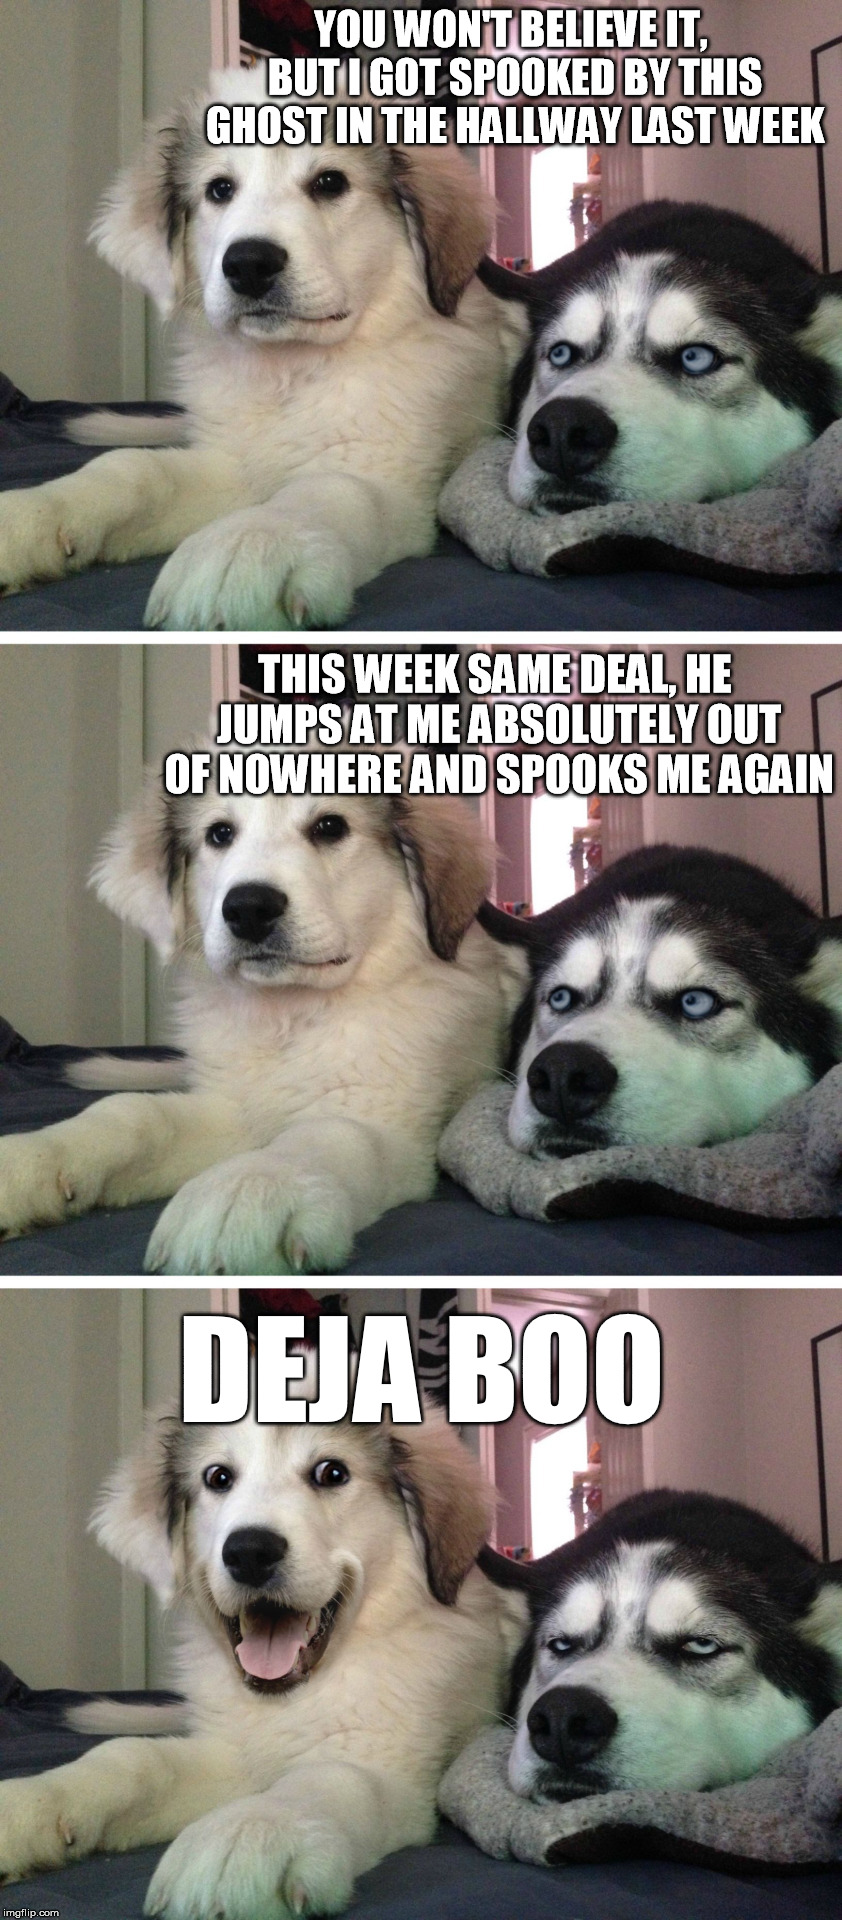 Boo..hiss? | YOU WON'T BELIEVE IT, BUT I GOT SPOOKED BY THIS GHOST IN THE HALLWAY LAST WEEK; THIS WEEK SAME DEAL, HE JUMPS AT ME ABSOLUTELY OUT OF NOWHERE AND SPOOKS ME AGAIN; DEJA BOO | image tagged in bad pun dogs,ghost | made w/ Imgflip meme maker